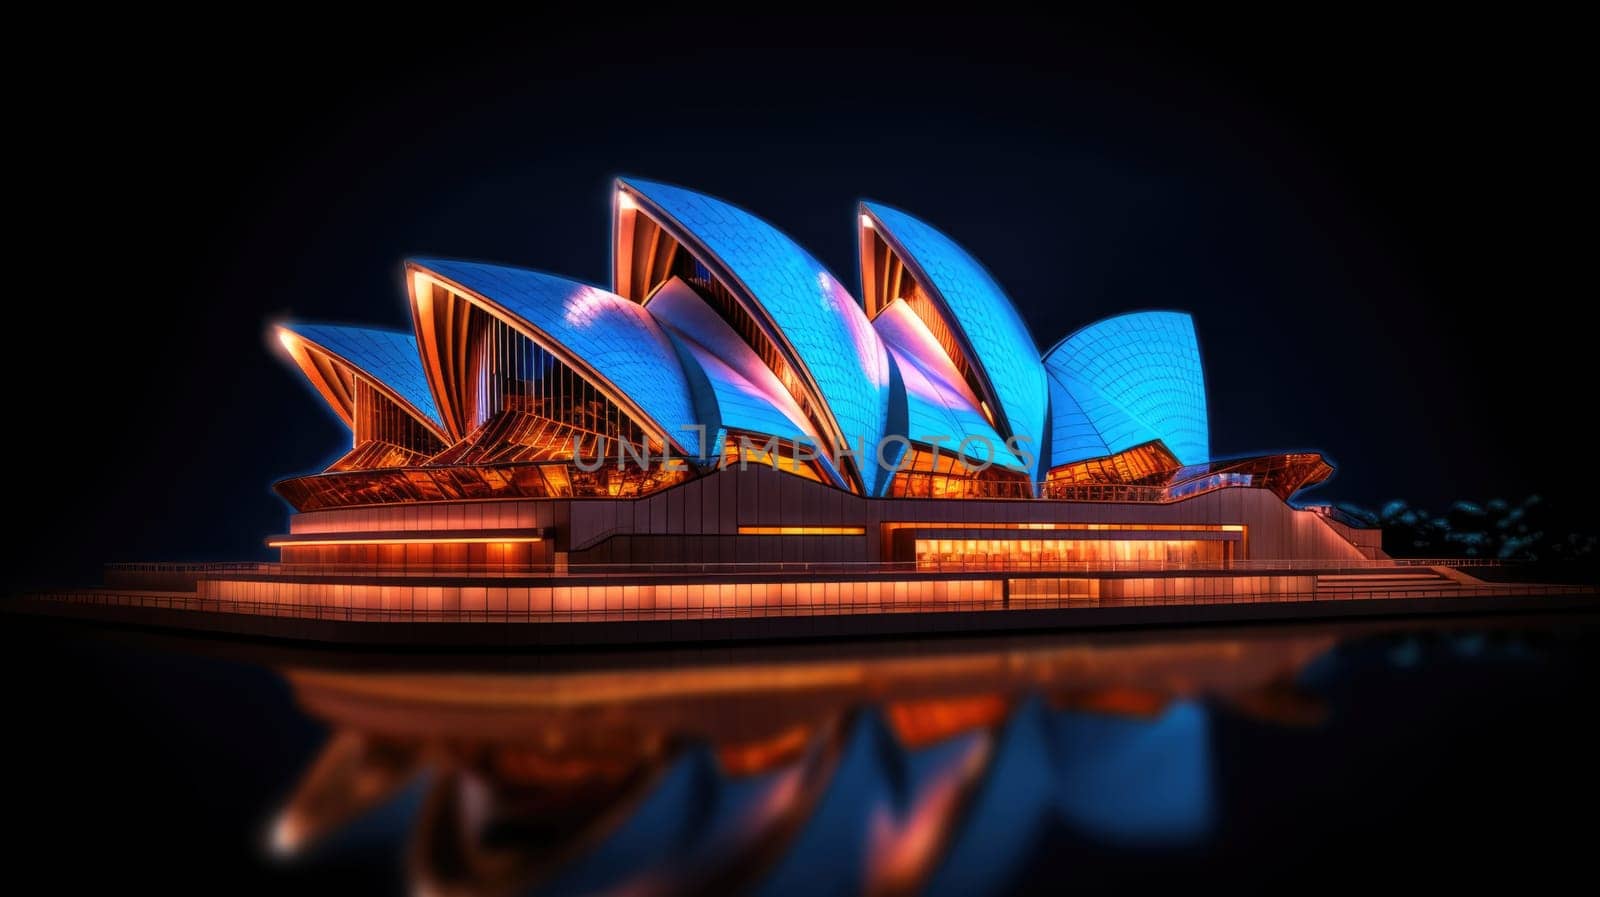 The Sydney Opera House, located in Sydney, Australia, is renowned for its iconic modern architecture and serves as a premier performing arts venue attracting visitors worldwide.